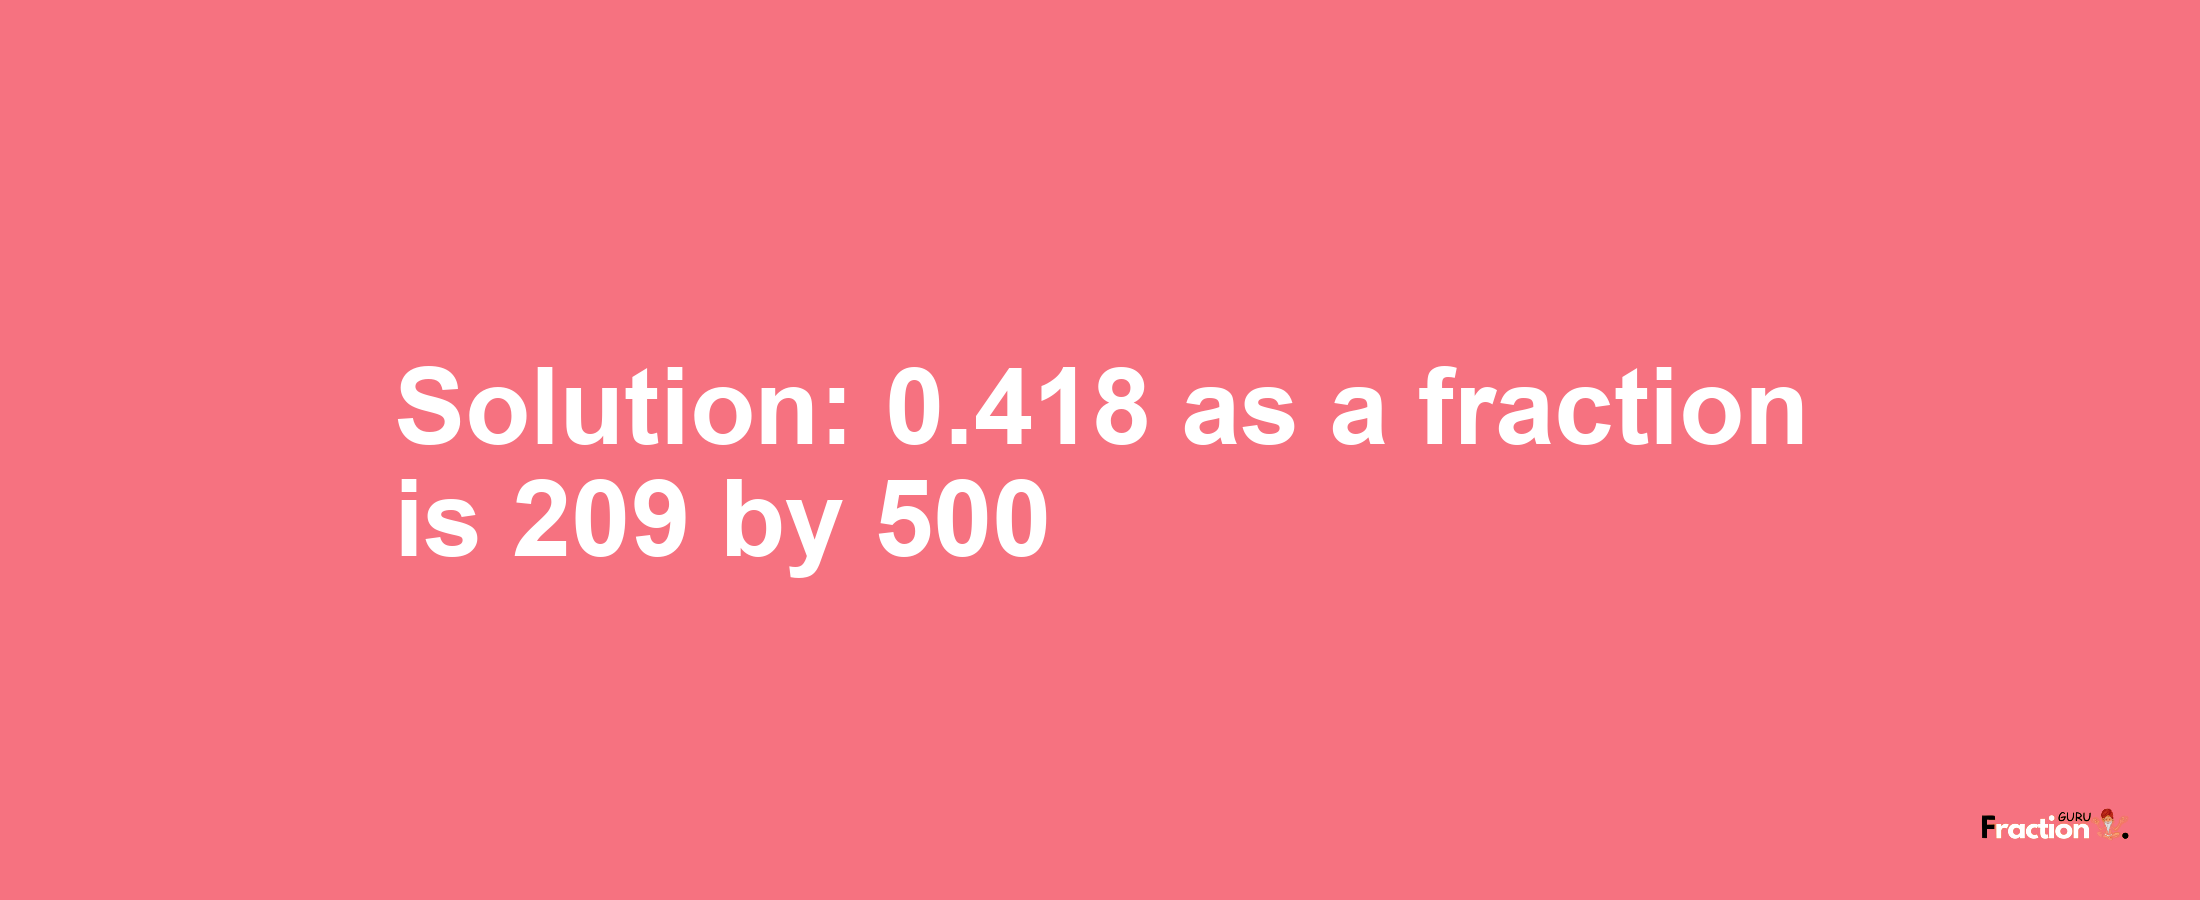 Solution:0.418 as a fraction is 209/500